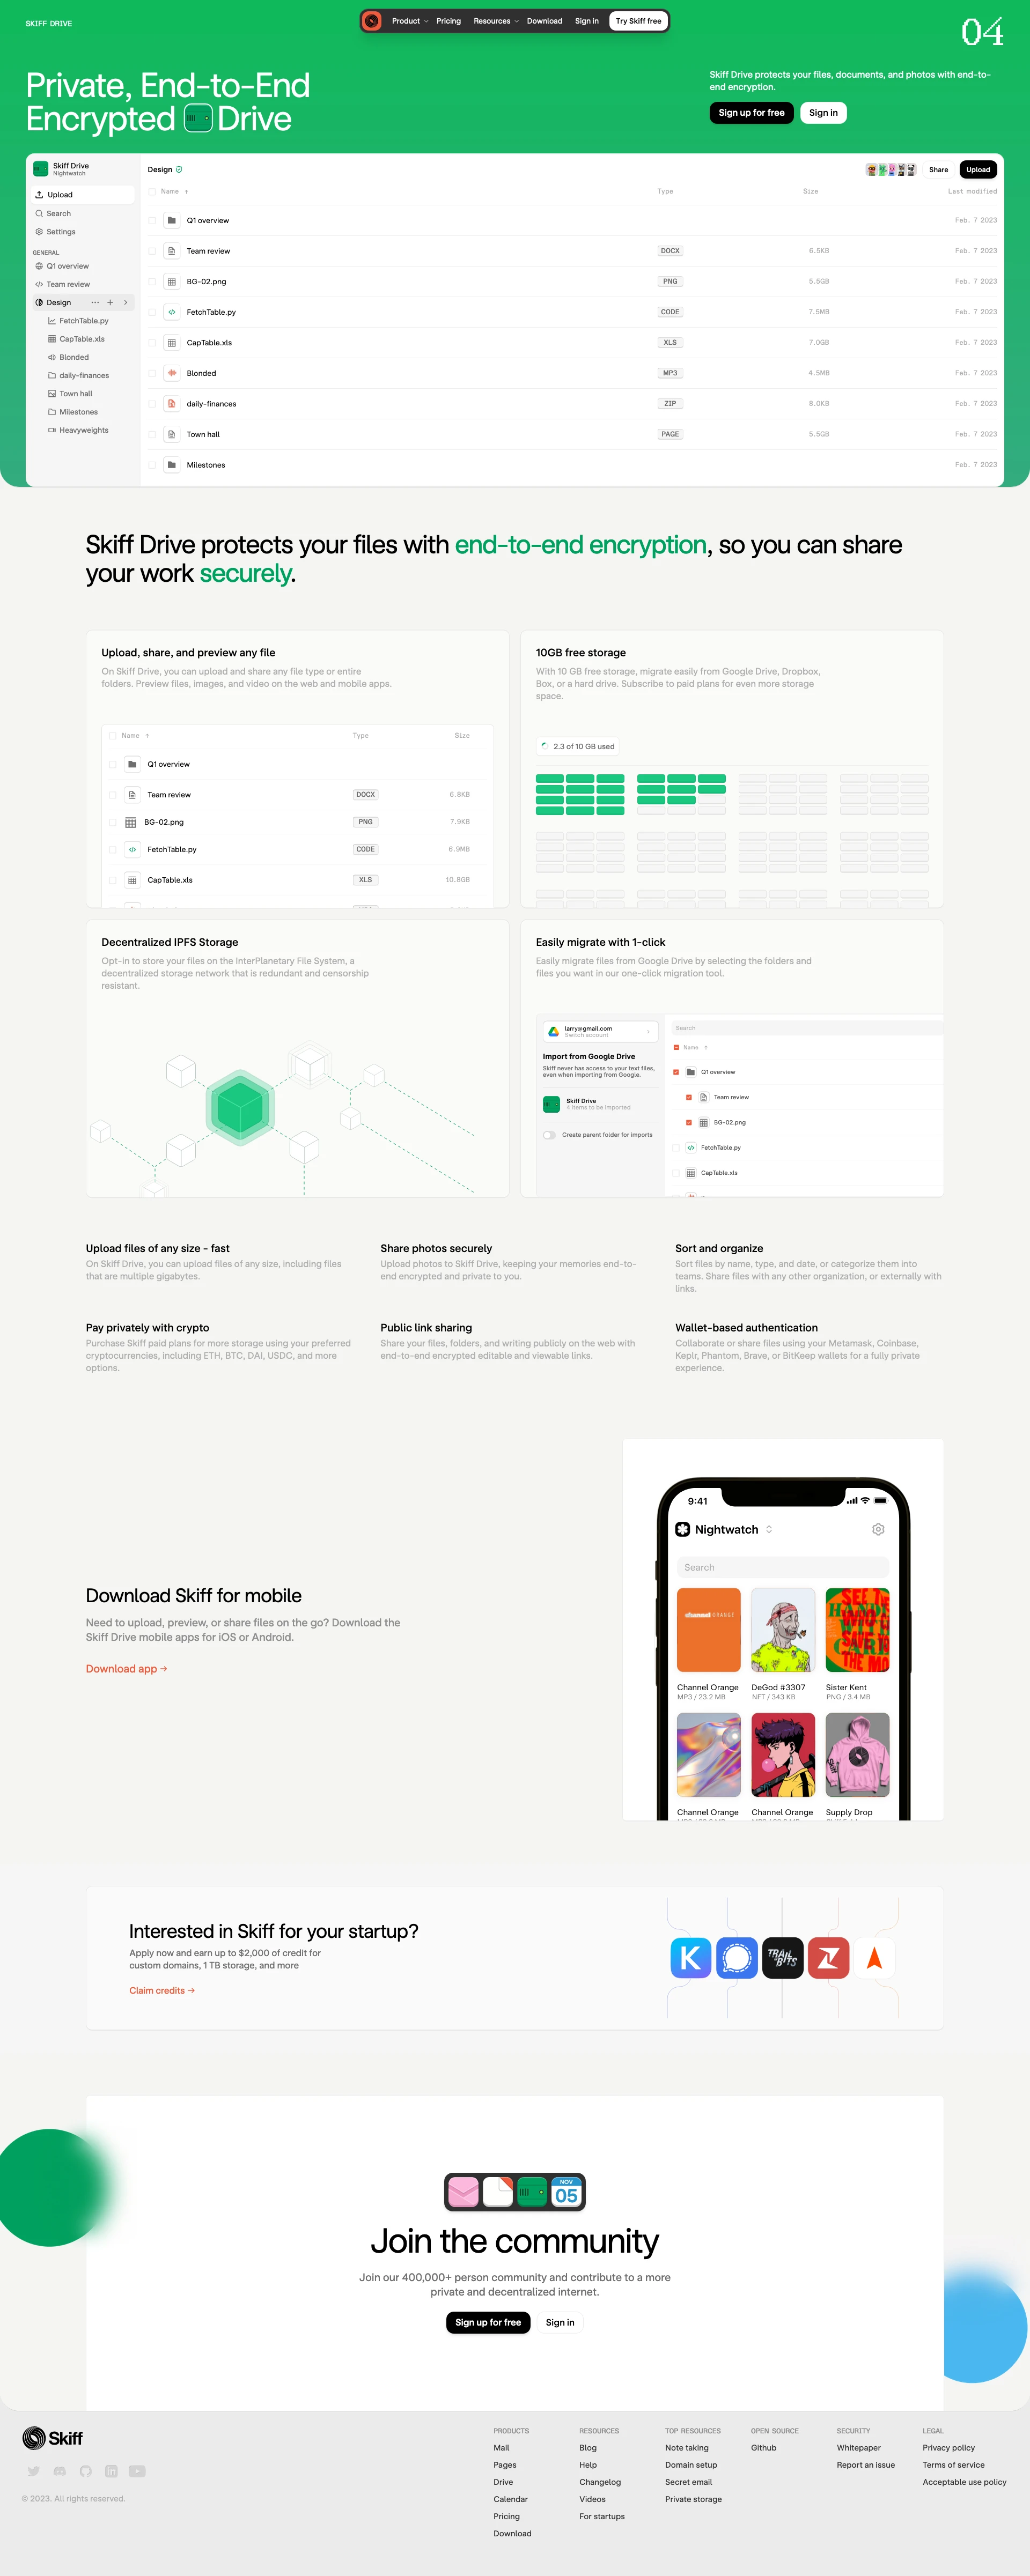 Skiff Landing Page Example: Skiff is the privacy-first workspace for free thinkers. End-to-end encrypted email, calendar, documents, and files that give you the power to communicate freely.